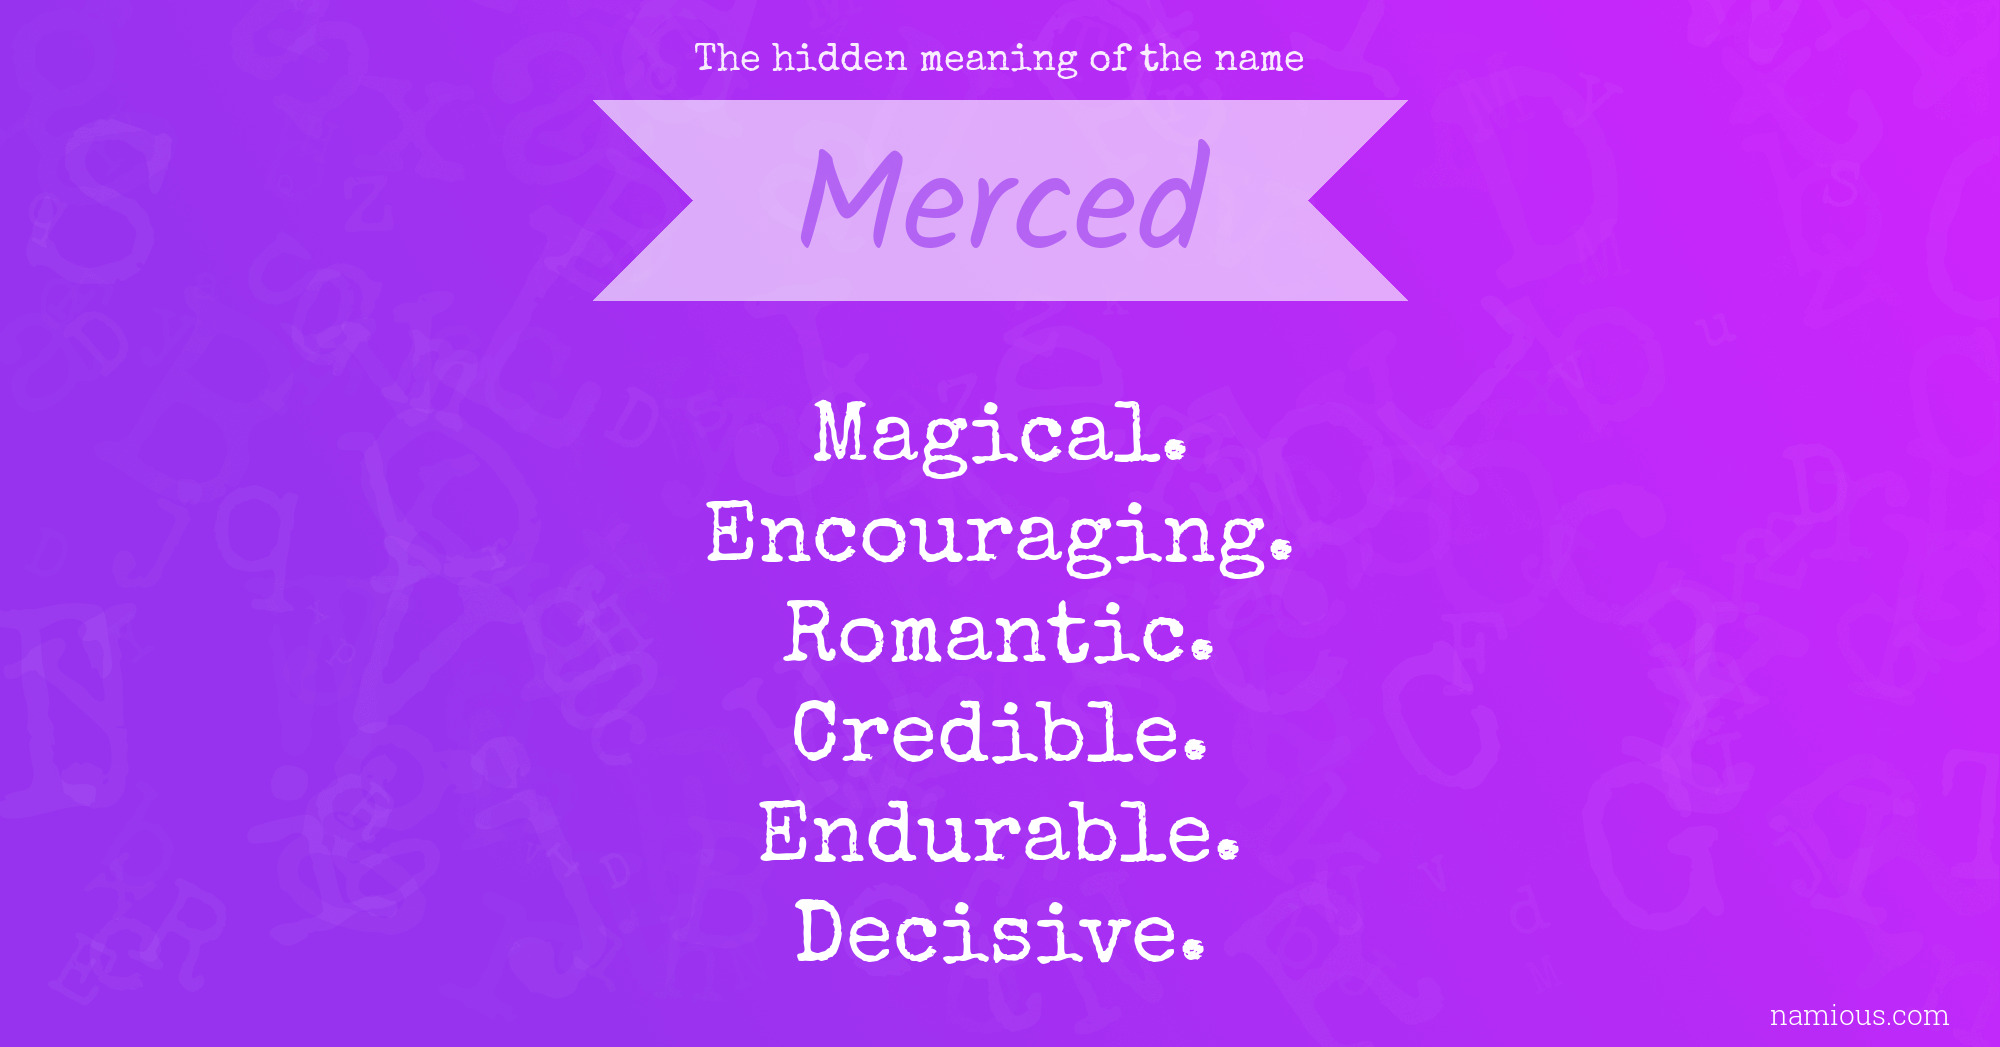 The hidden meaning of the name Merced